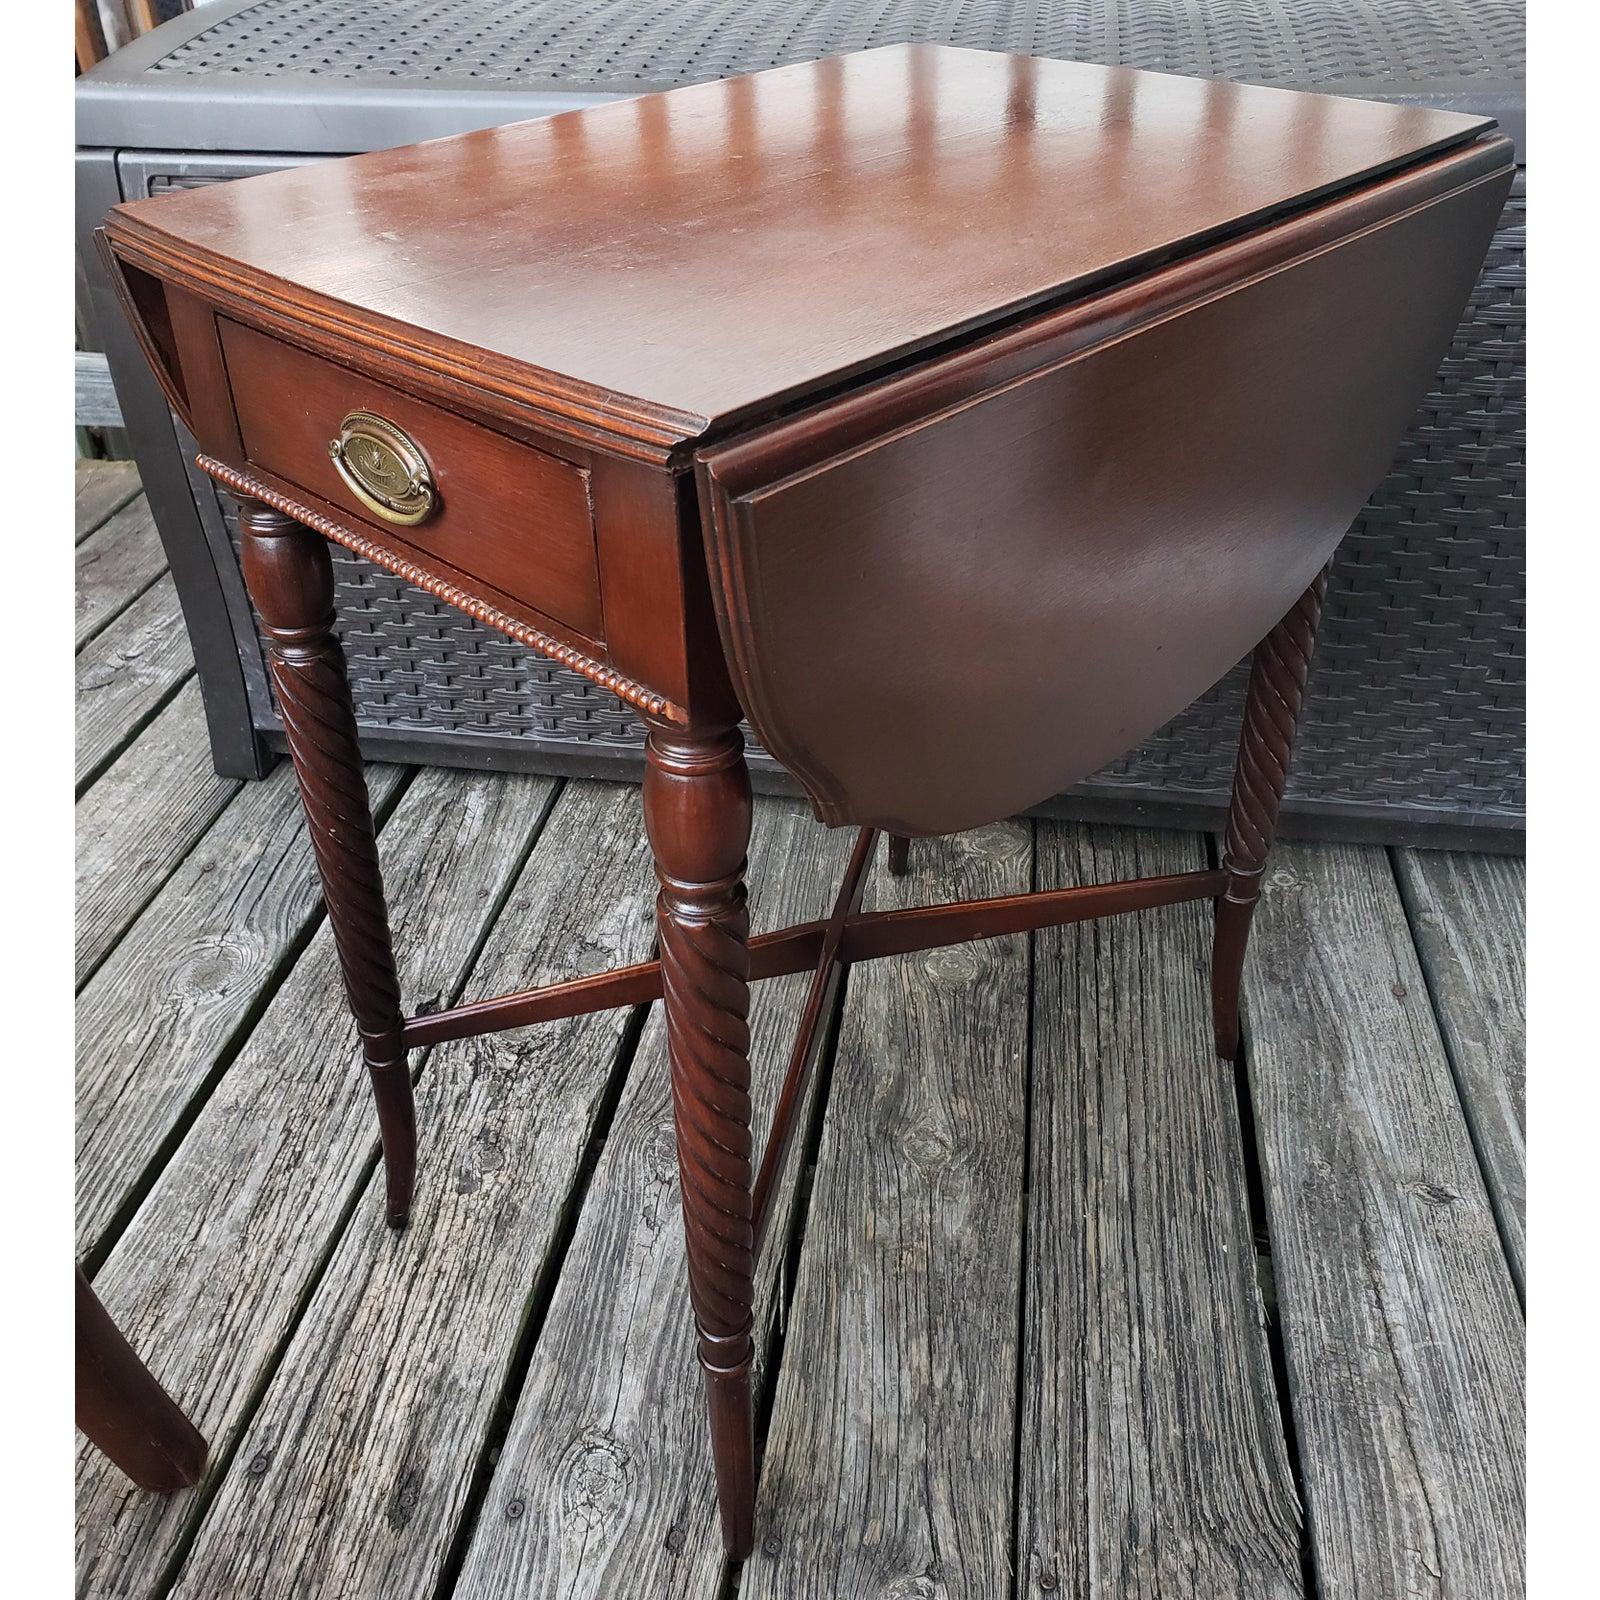 Genuine mahogany pembroke table with turned legs and cros legs supports for greater stability.
In very good condition with some signs of use. Measures: 16 W x 21.75 D x 25 H.